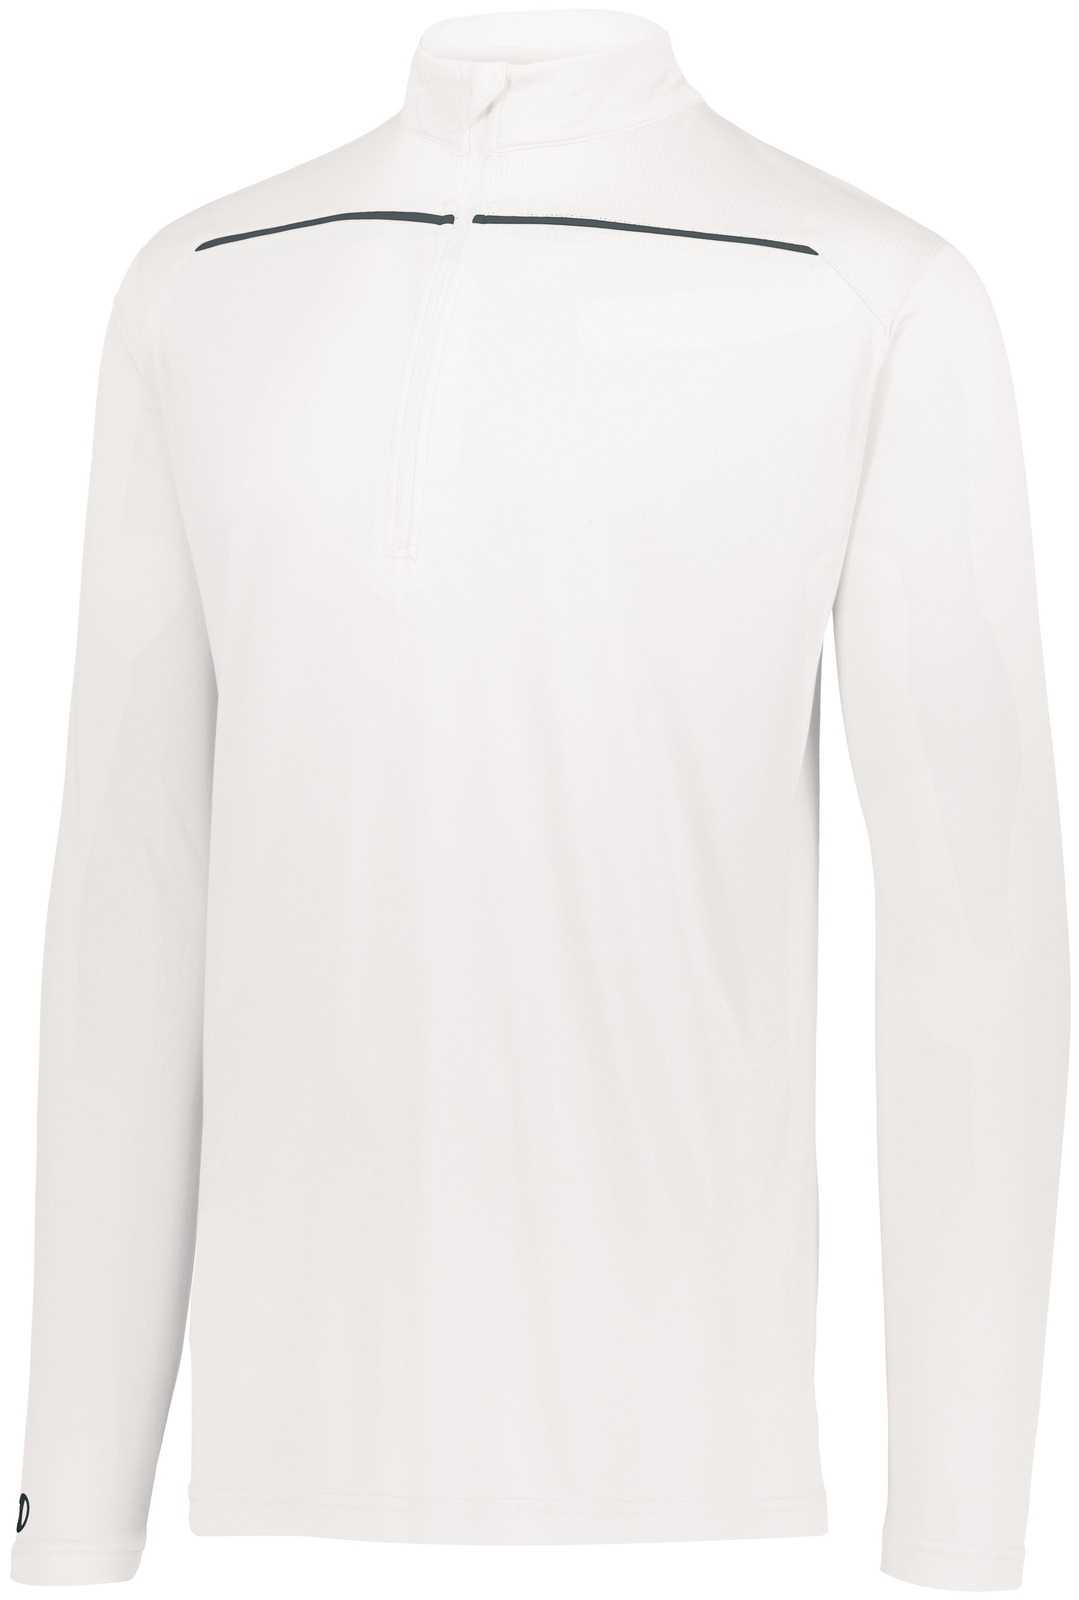 Holloway 222562 Defer Pullover - White Graphite - HIT a Double